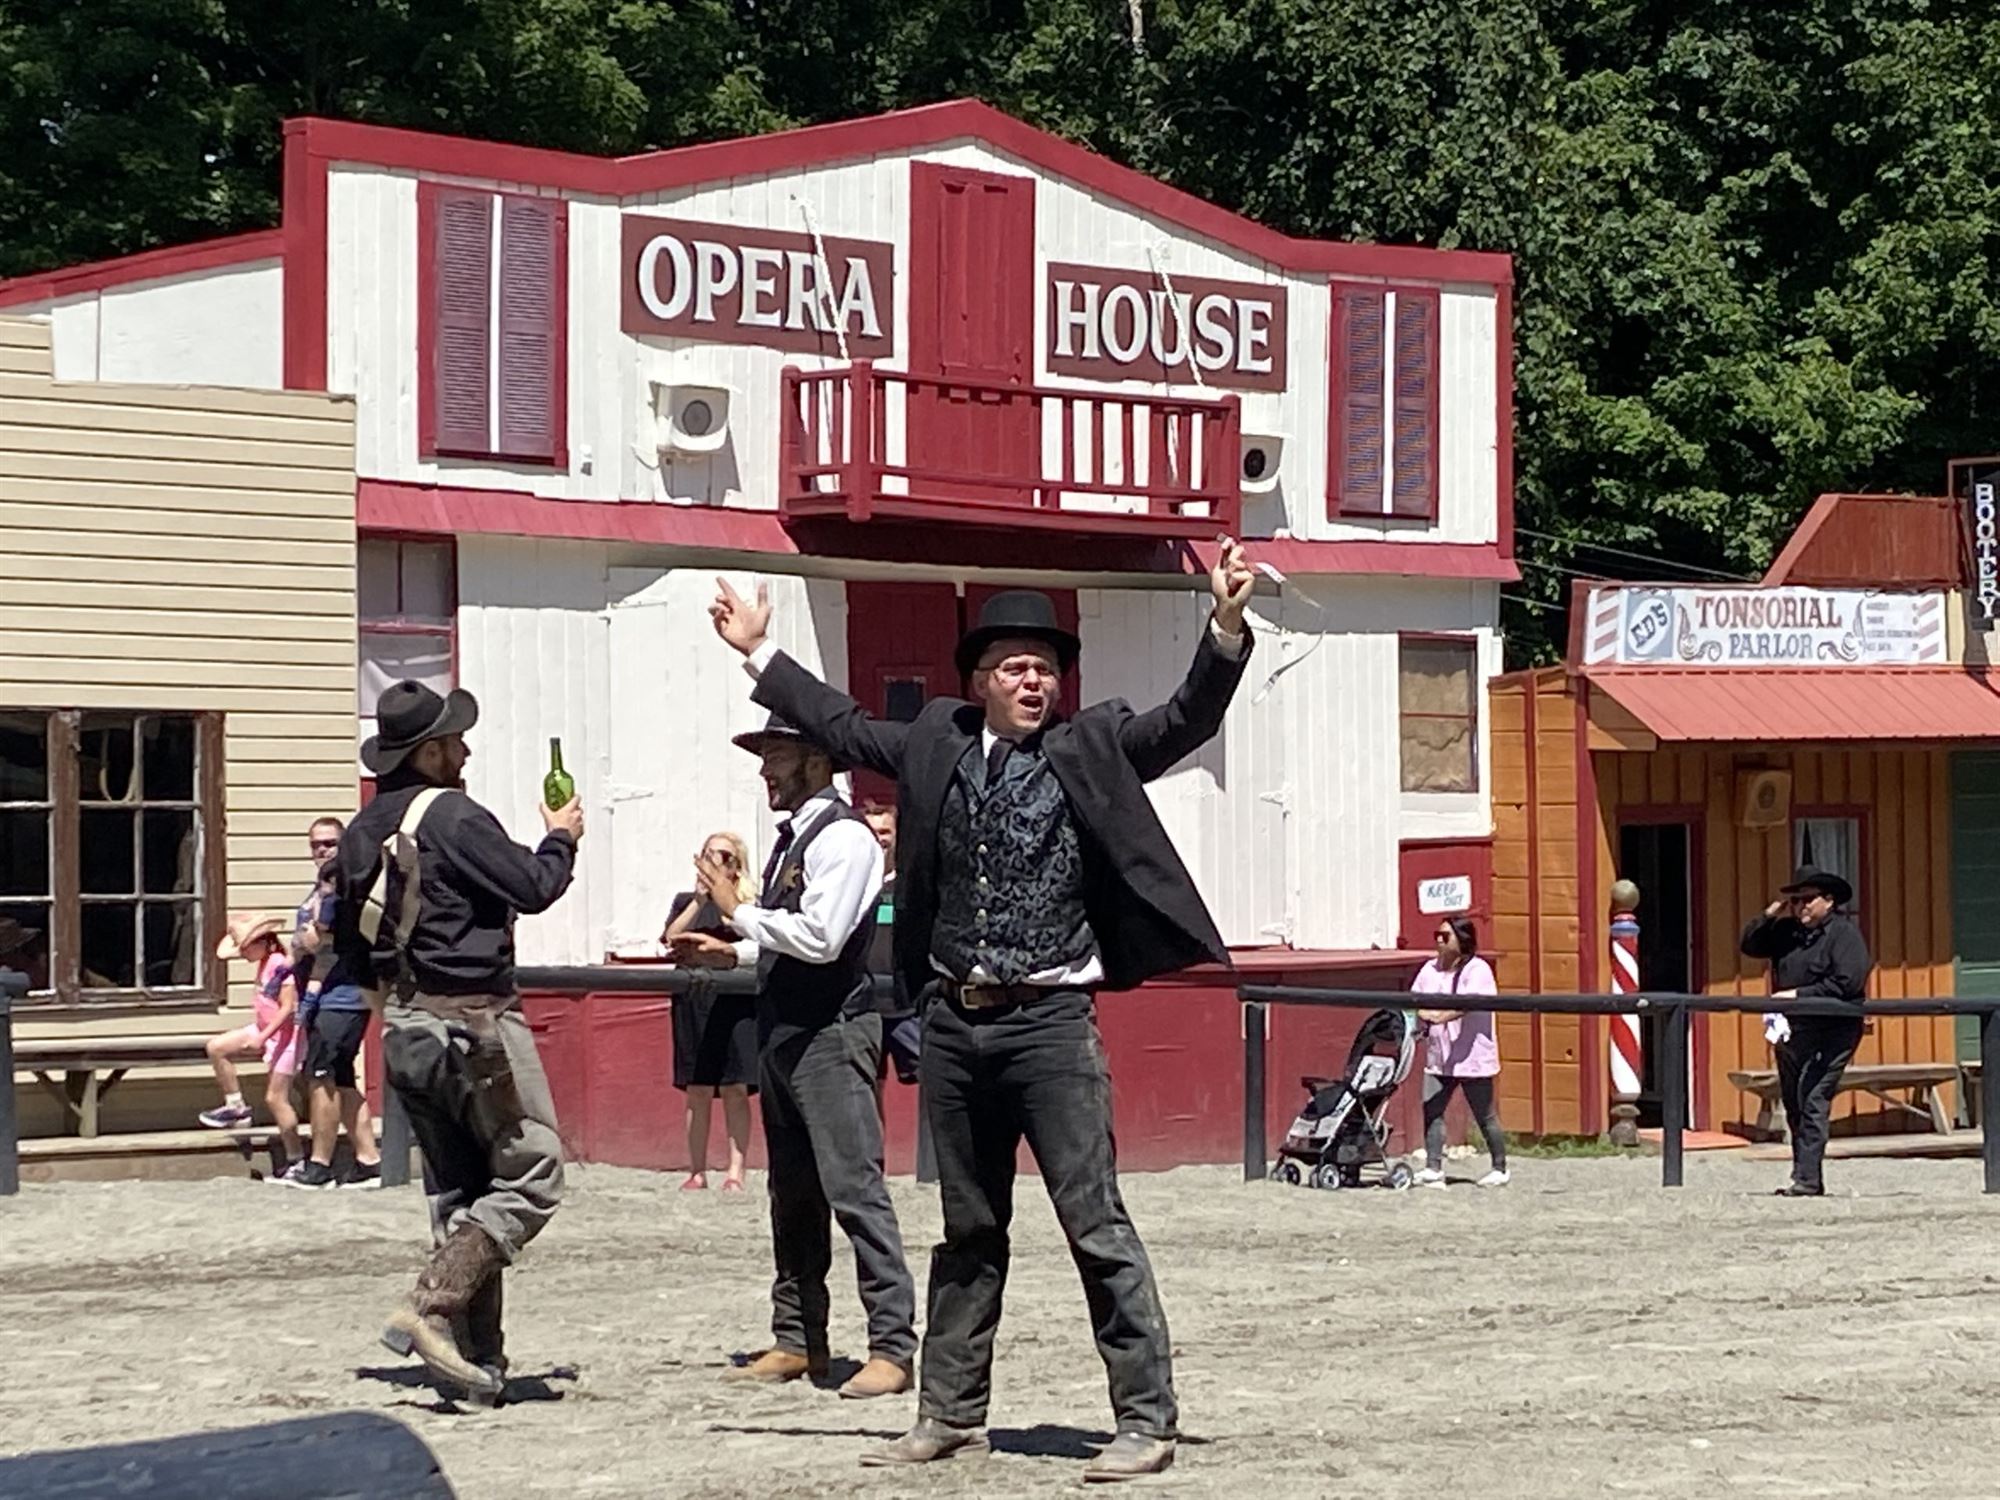 Wild West City shows New Jersey